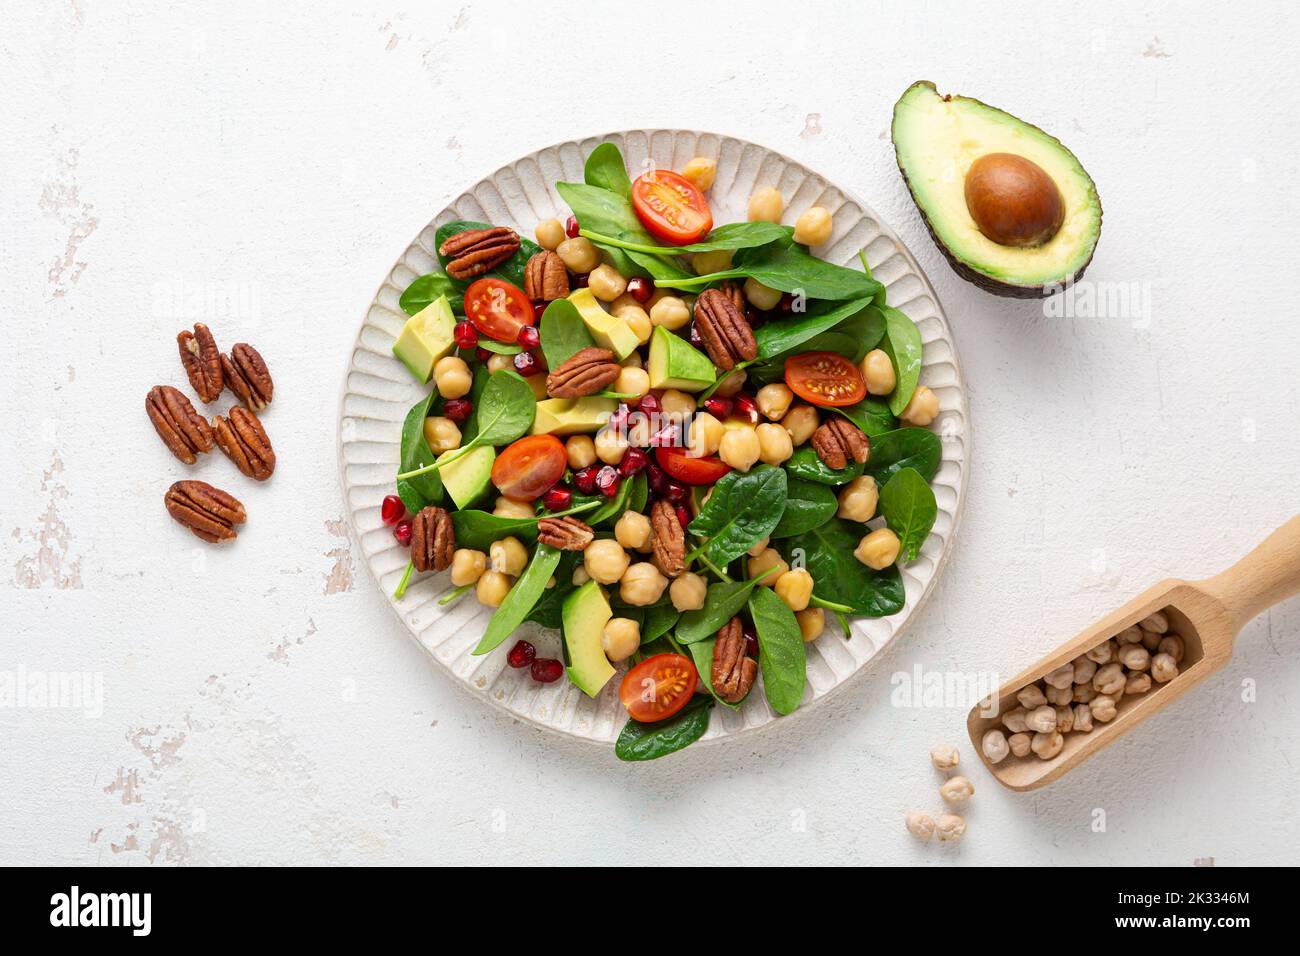 Vegan salad with chick-pea avocado spinach top view healthy food Stock Photo